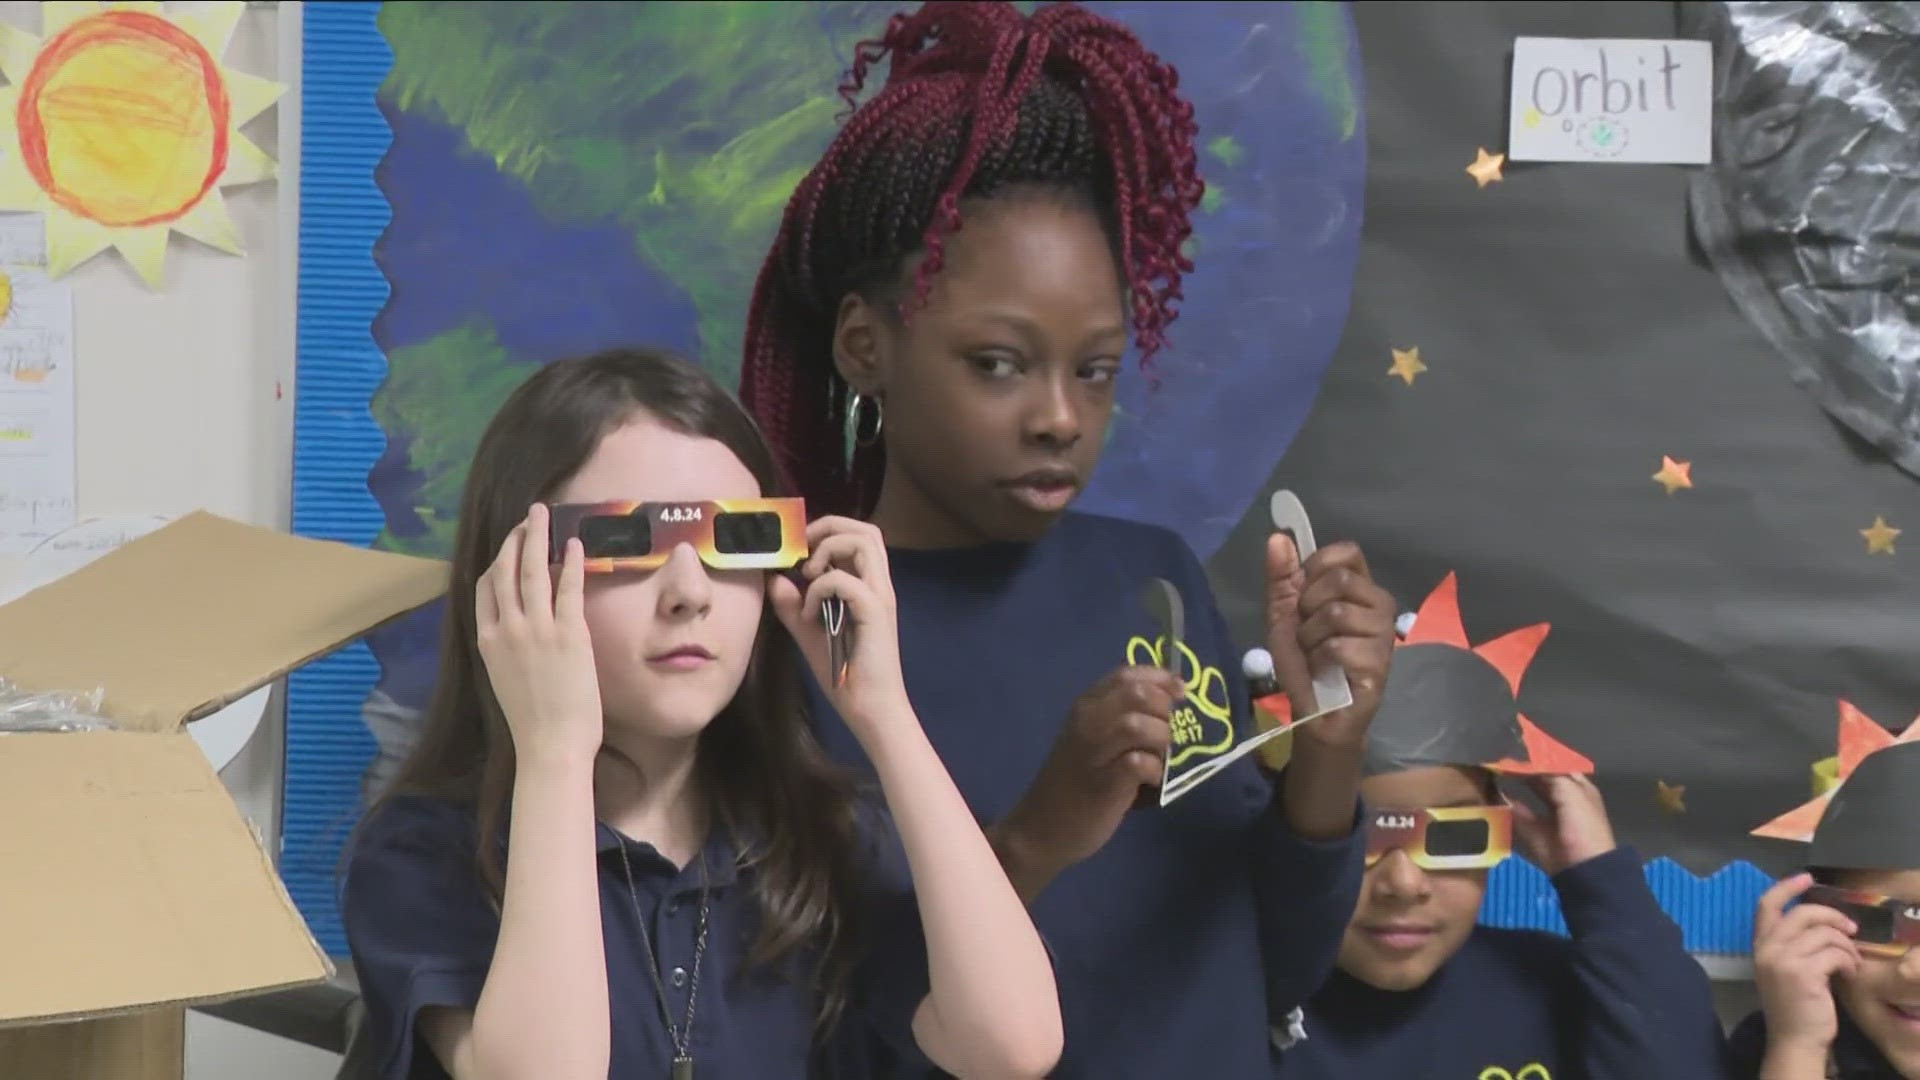 Buffalo State University and M&T Bank donated 50,000 solar eclipse glasses to Buffalo Public Schools. Educational materials about the eclipse were also donated.